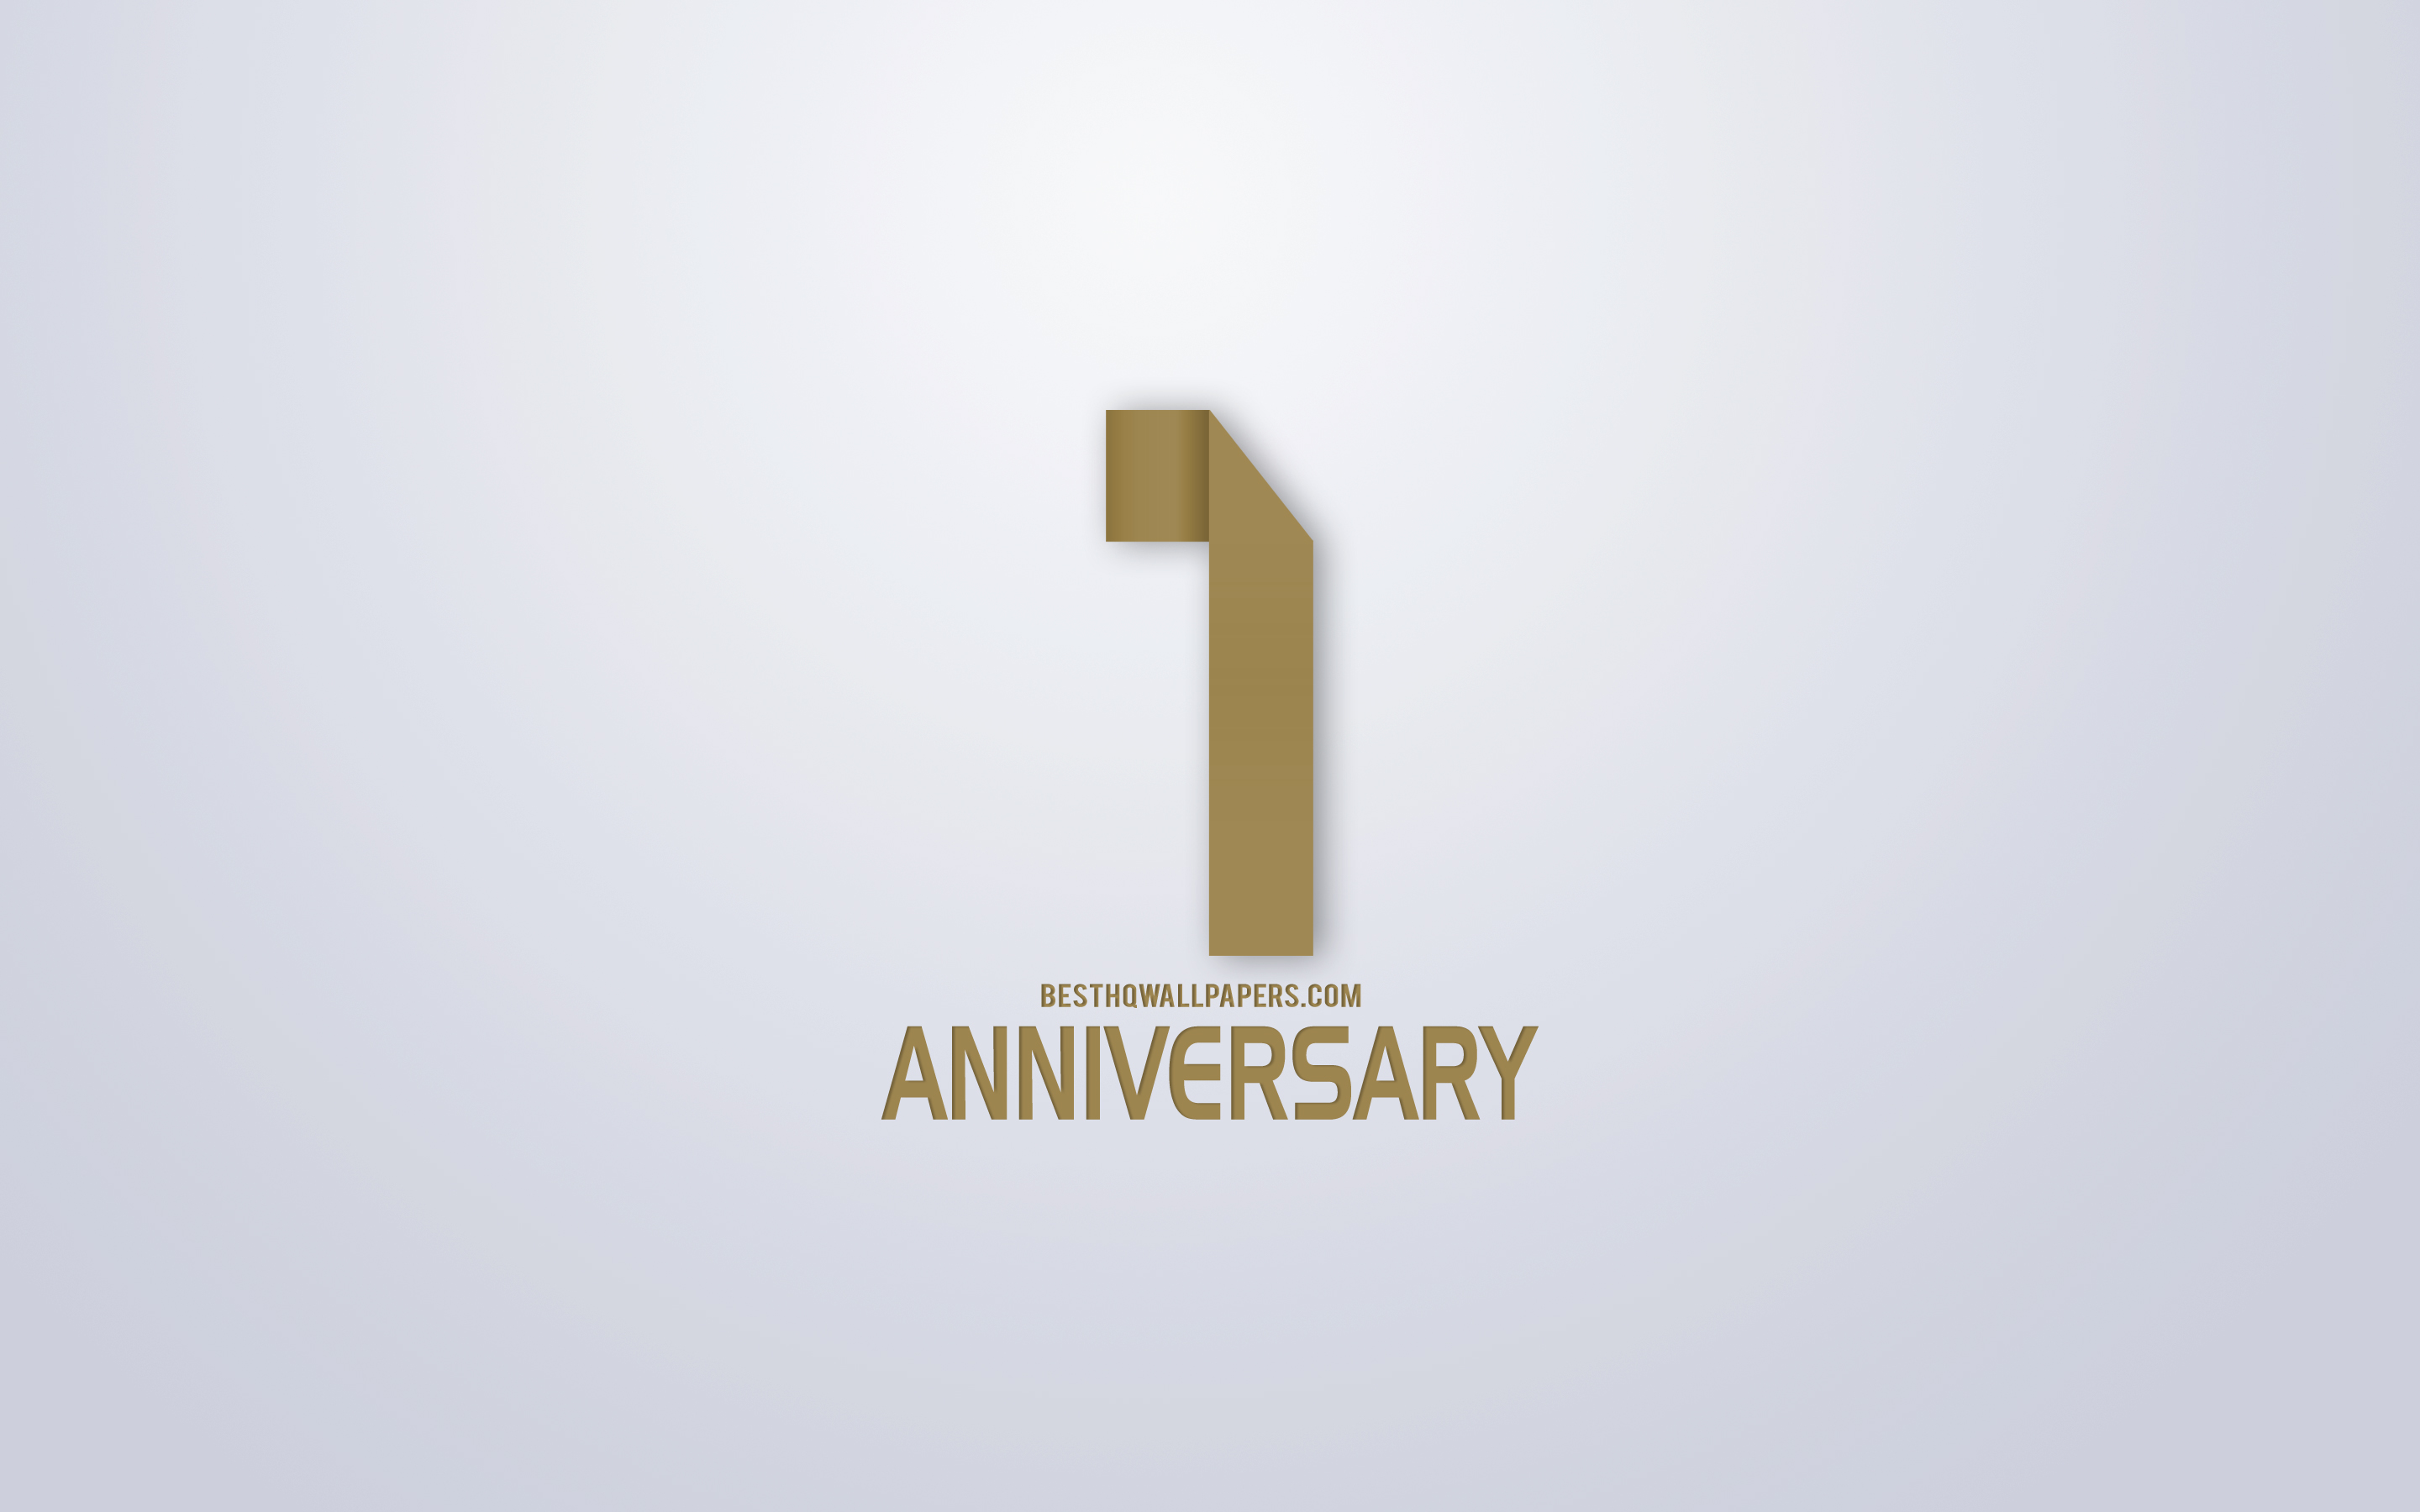 Download wallpaper 1st Anniversary, Anniversary golden origami Background, creative art, 1 Year Anniversary, gold origami letters, 1st Anniversary sign, Anniversary Background for desktop with resolution 2880x1800. High Quality HD picture wallpaper